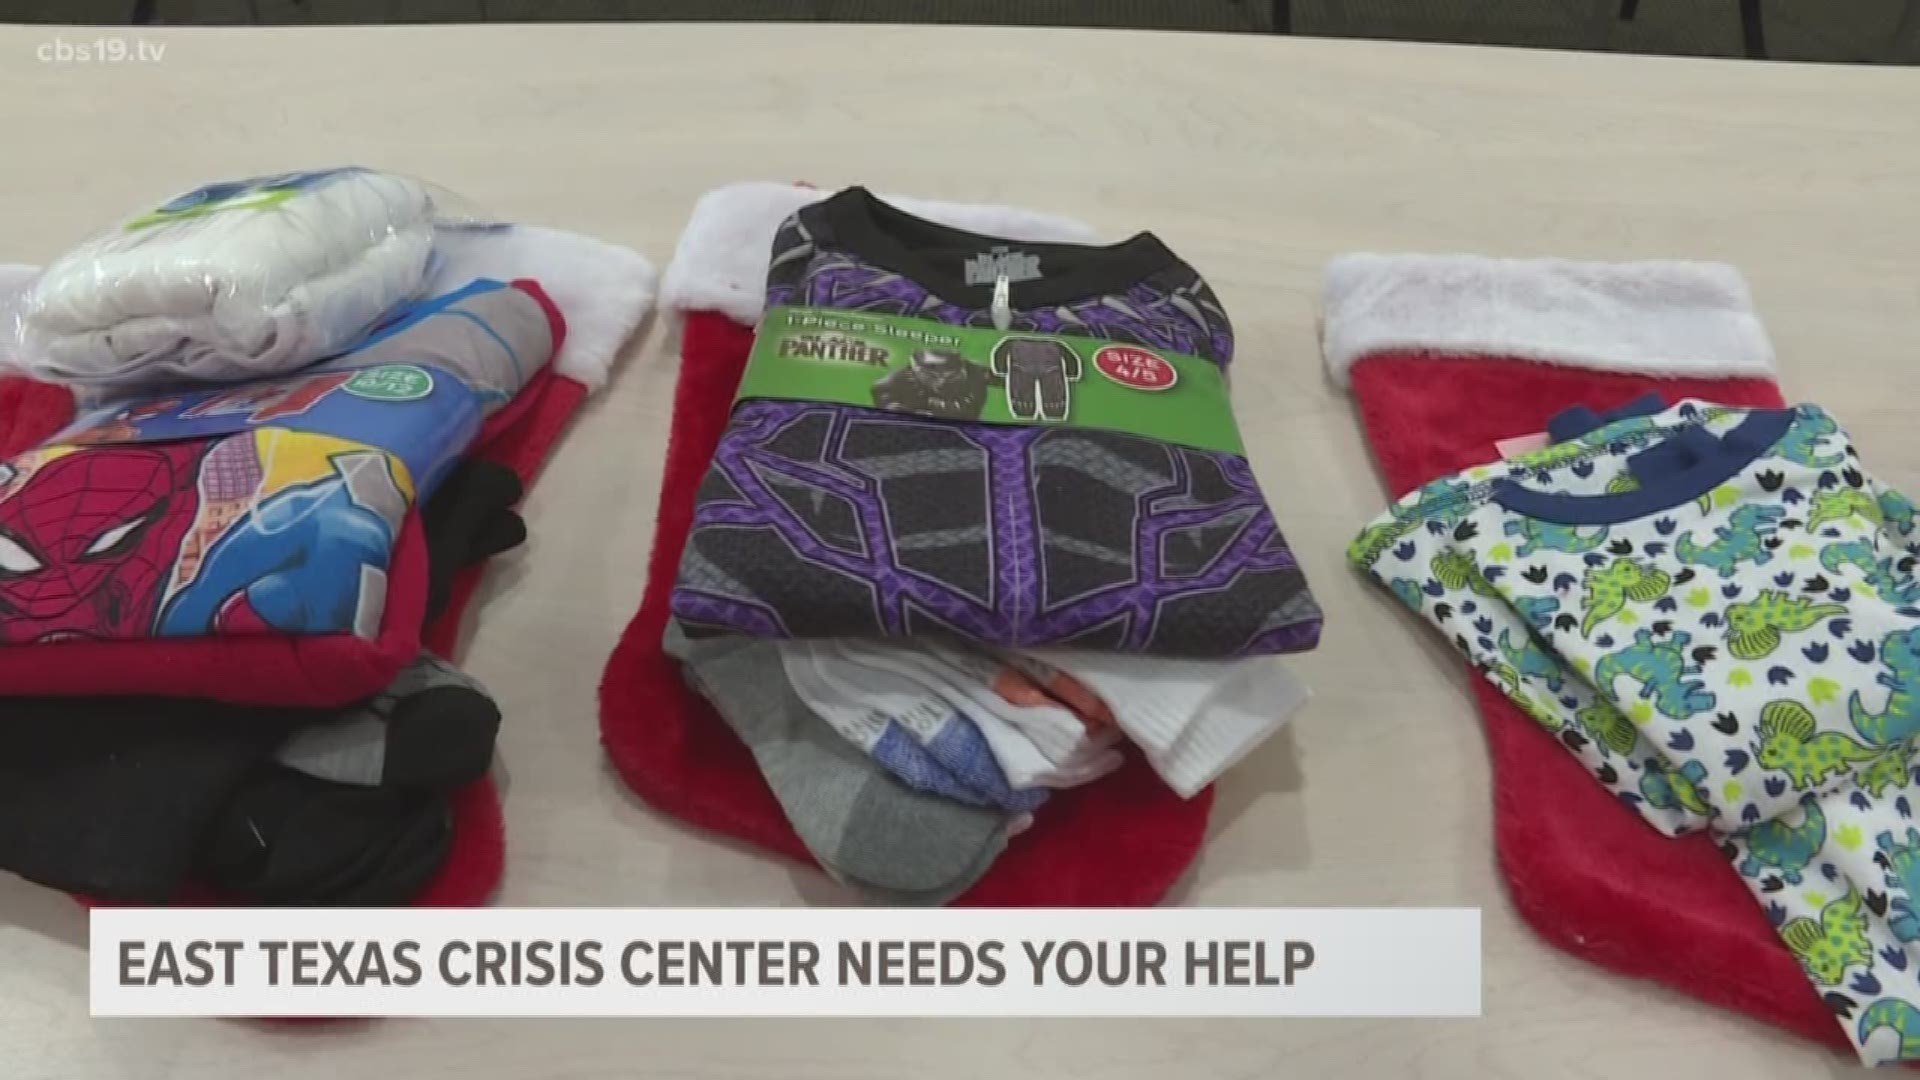 The East Texas Crisis Center is hoping to get some last minute essentials before Christmas.